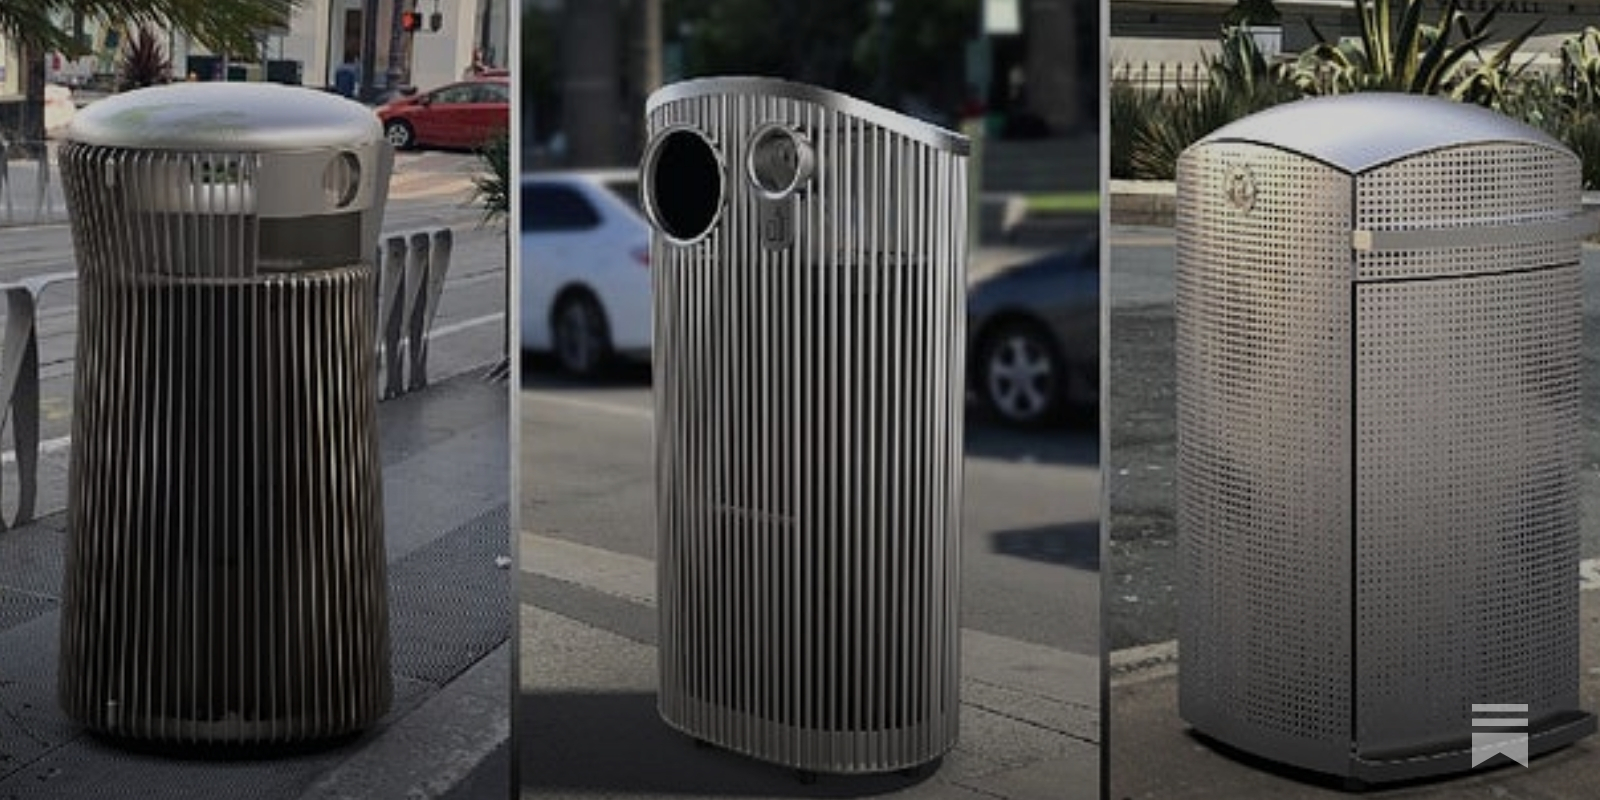 San Francisco's $20,000 trash cans - by Ali Griswold